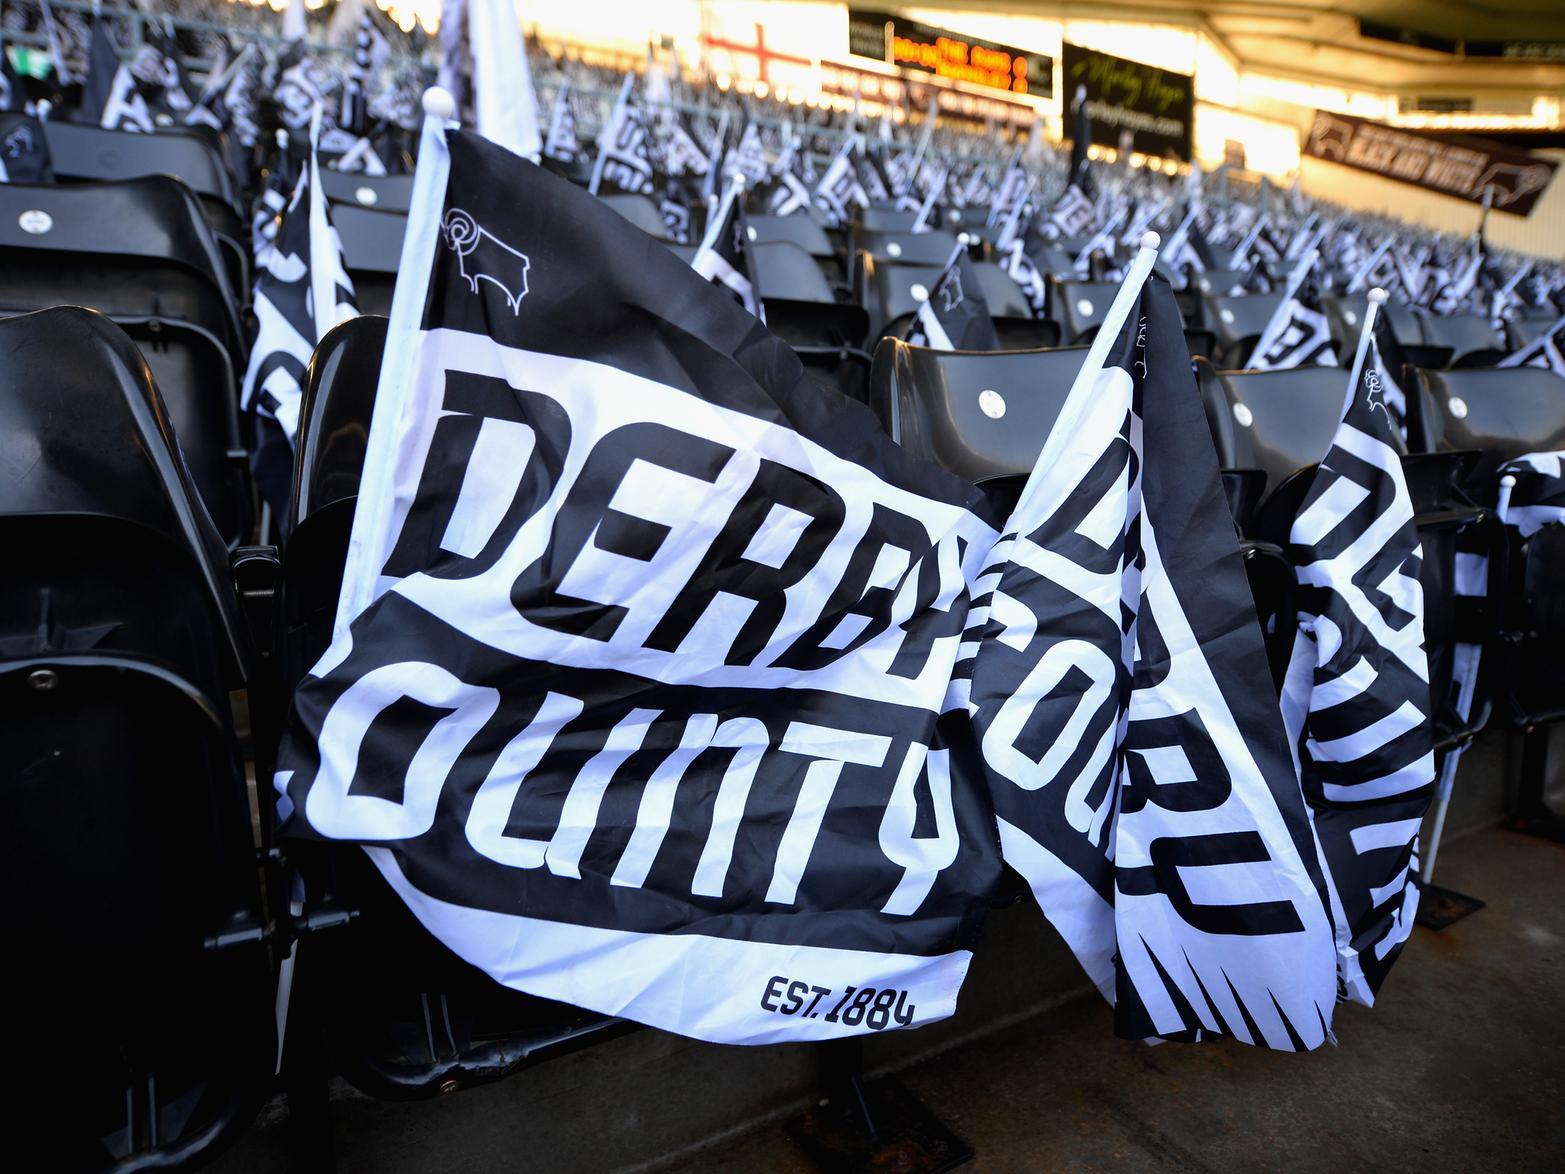 Derby County could be docked 21 points after being charged for a financial breach by the EFL, which could put them in relegation trouble. (Various)